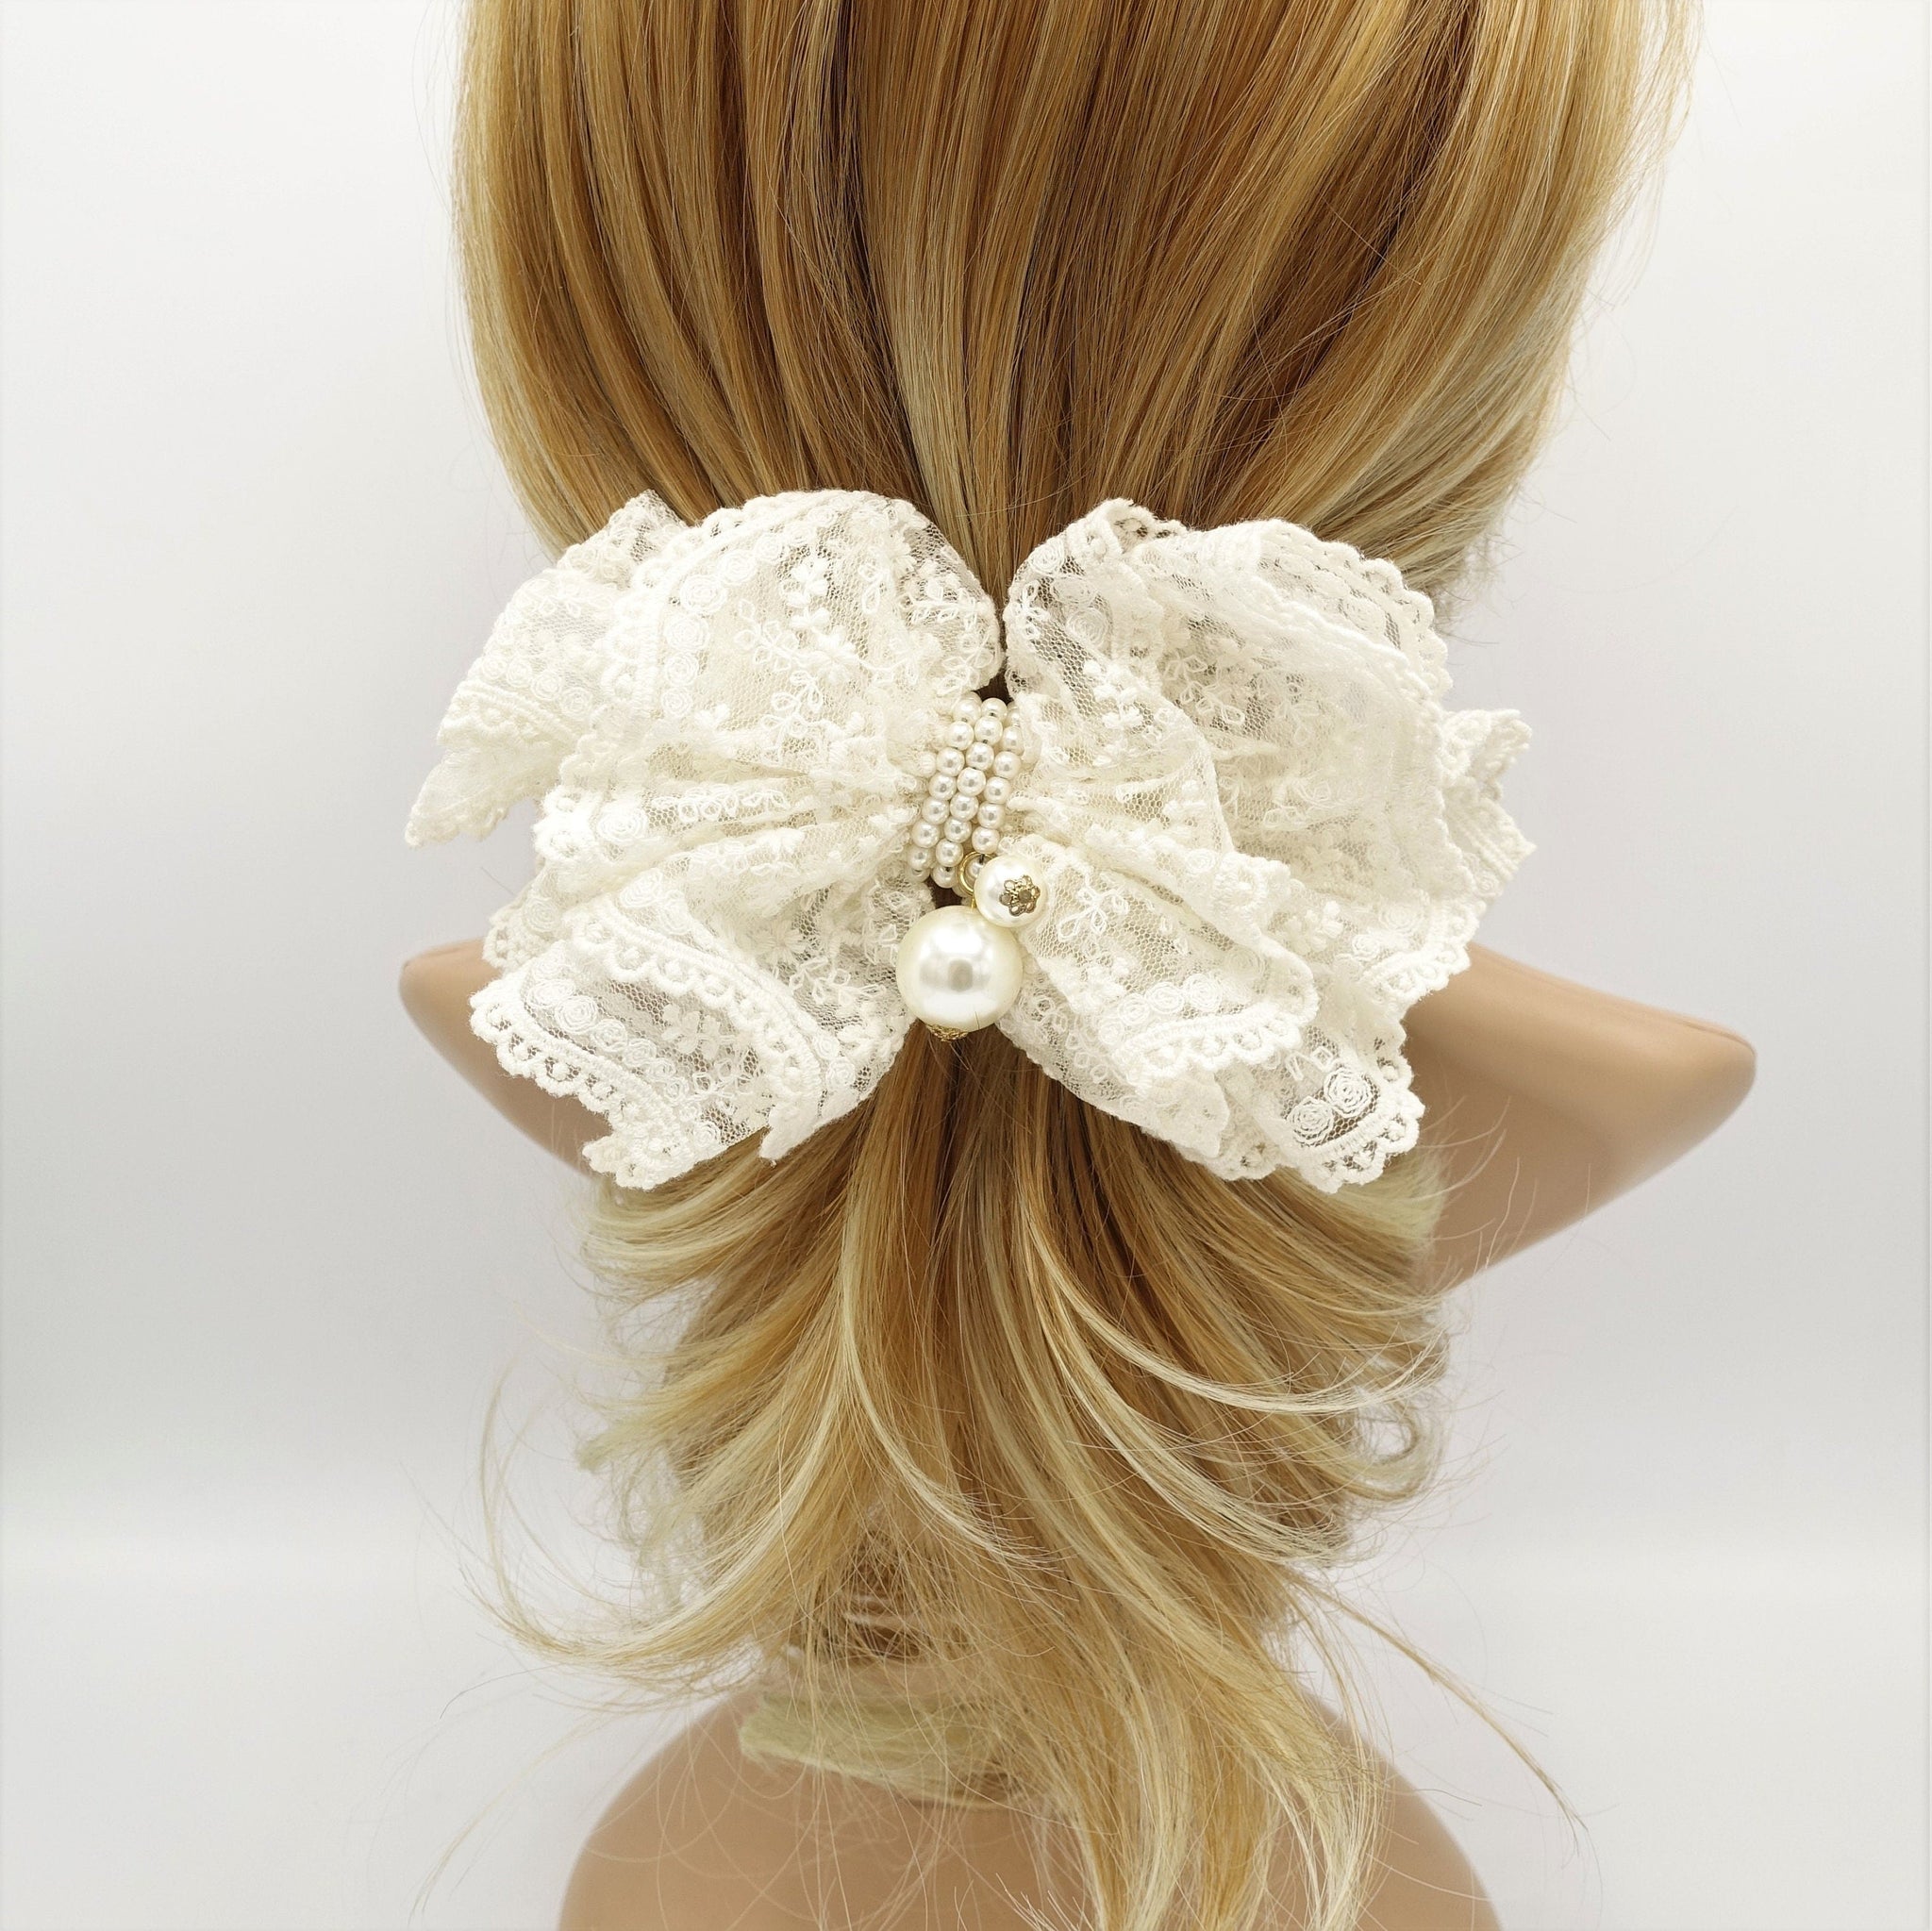 veryshine.com Barrette (Bow) Cream white Floral lace layered bow french hair barrette elegant women hair accessory